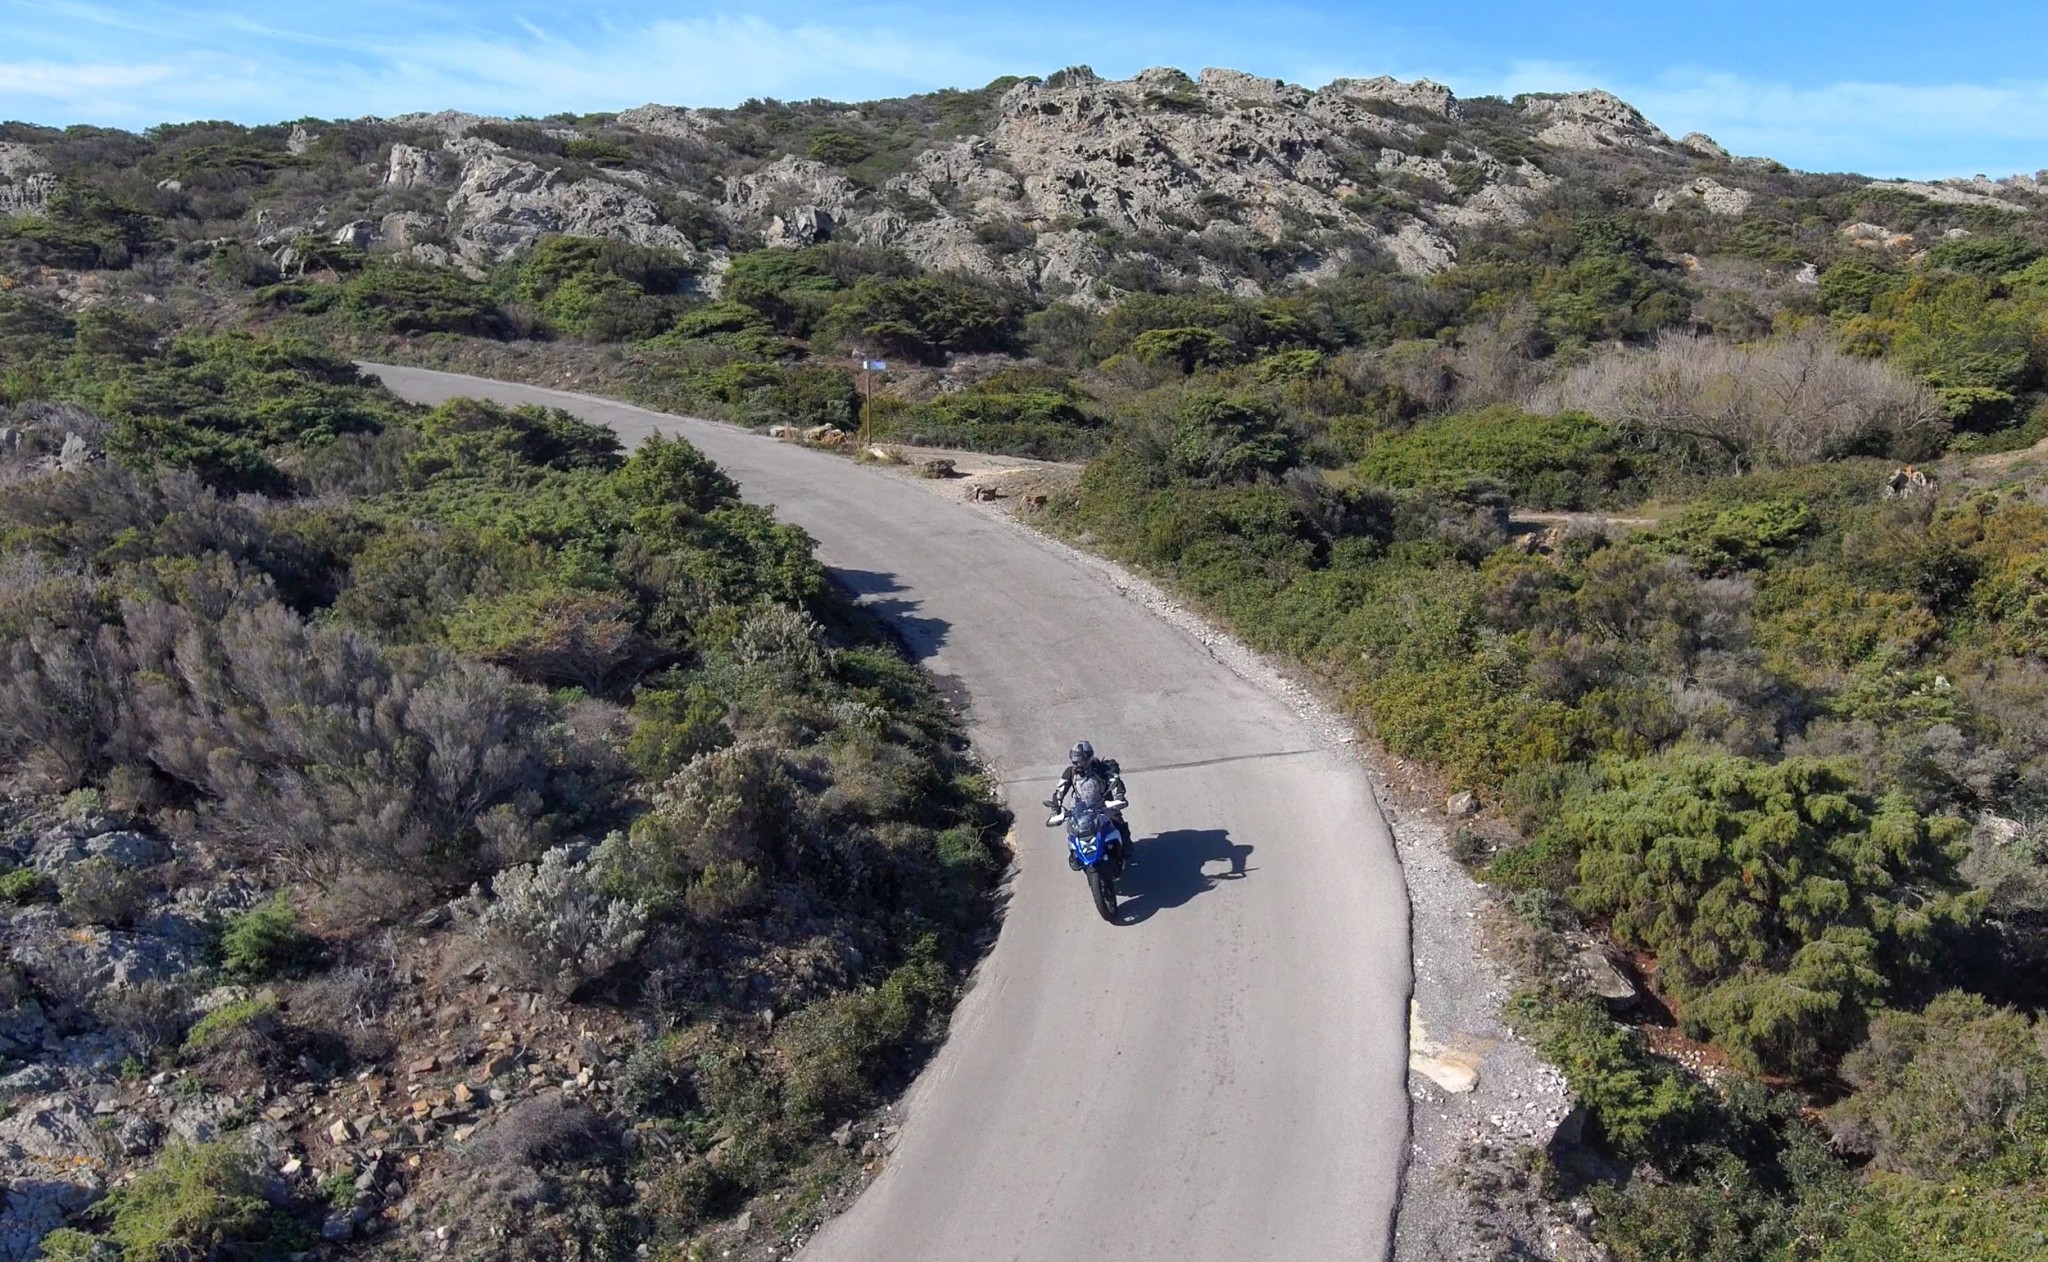 BMW R 1300 GS road test - from Barcelona to Vienna - Image 7